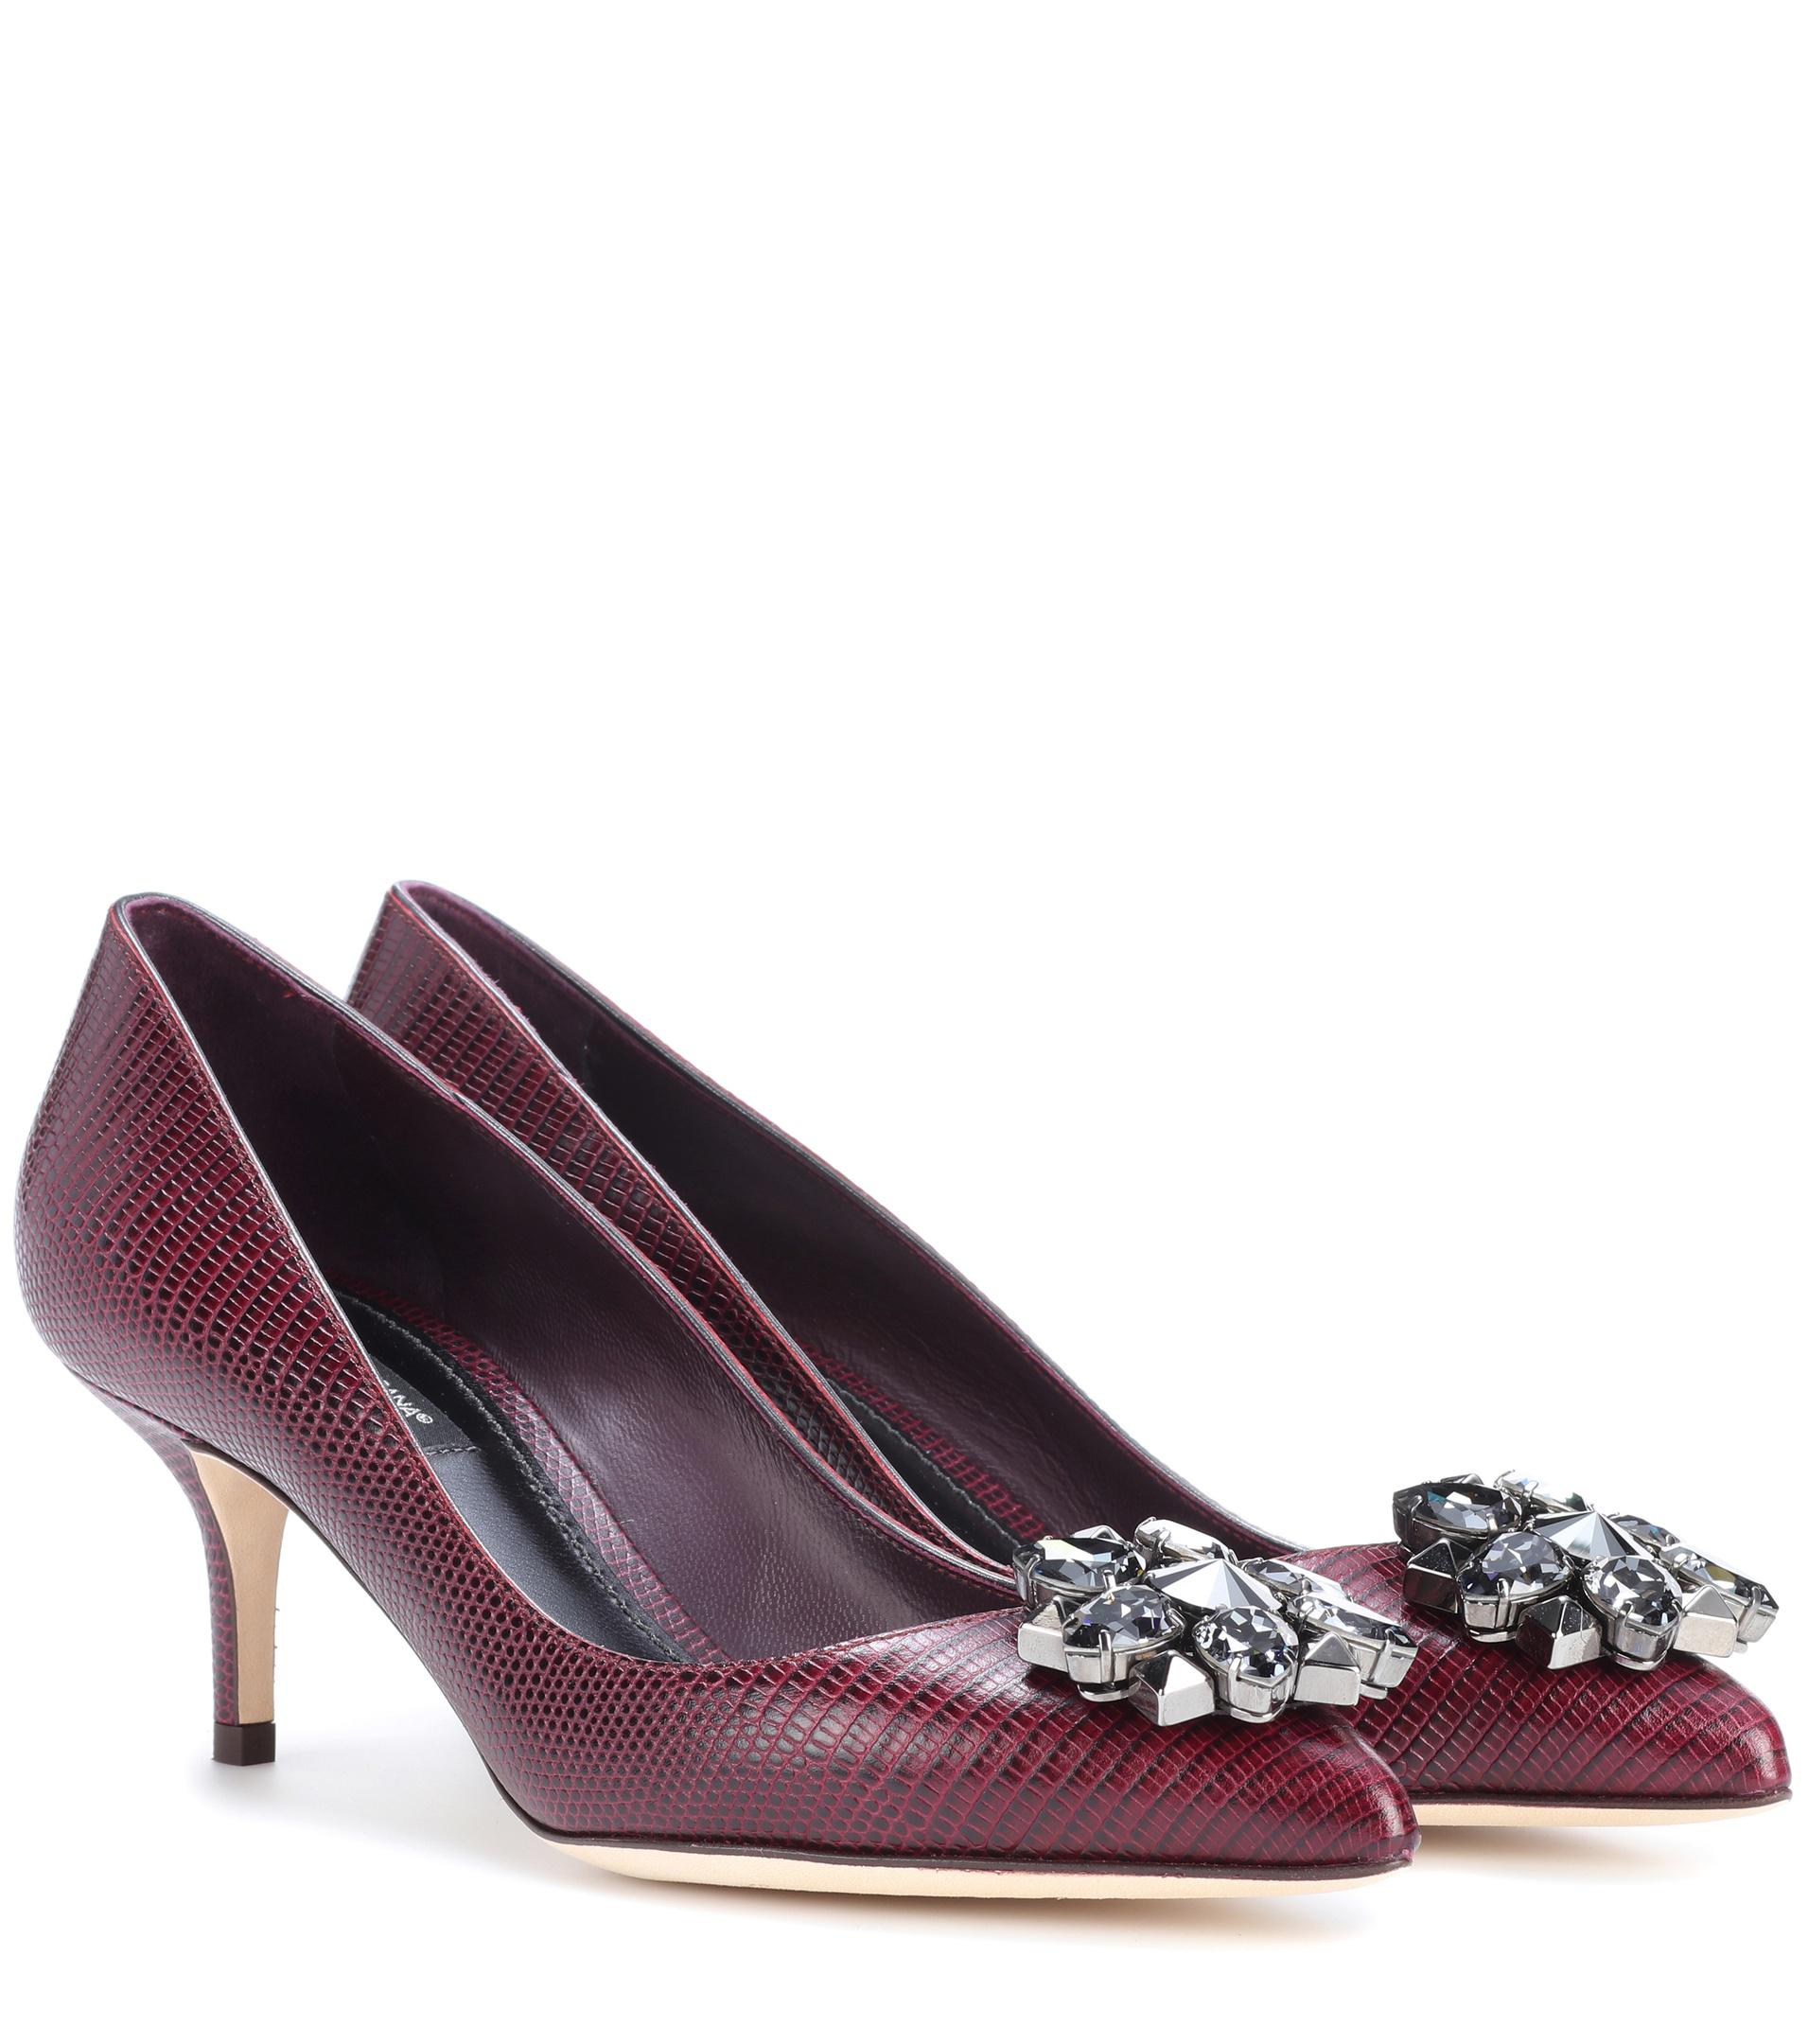 Dolce & Gabbana Bellucci Embellished Leather Pumps in Purple - Lyst